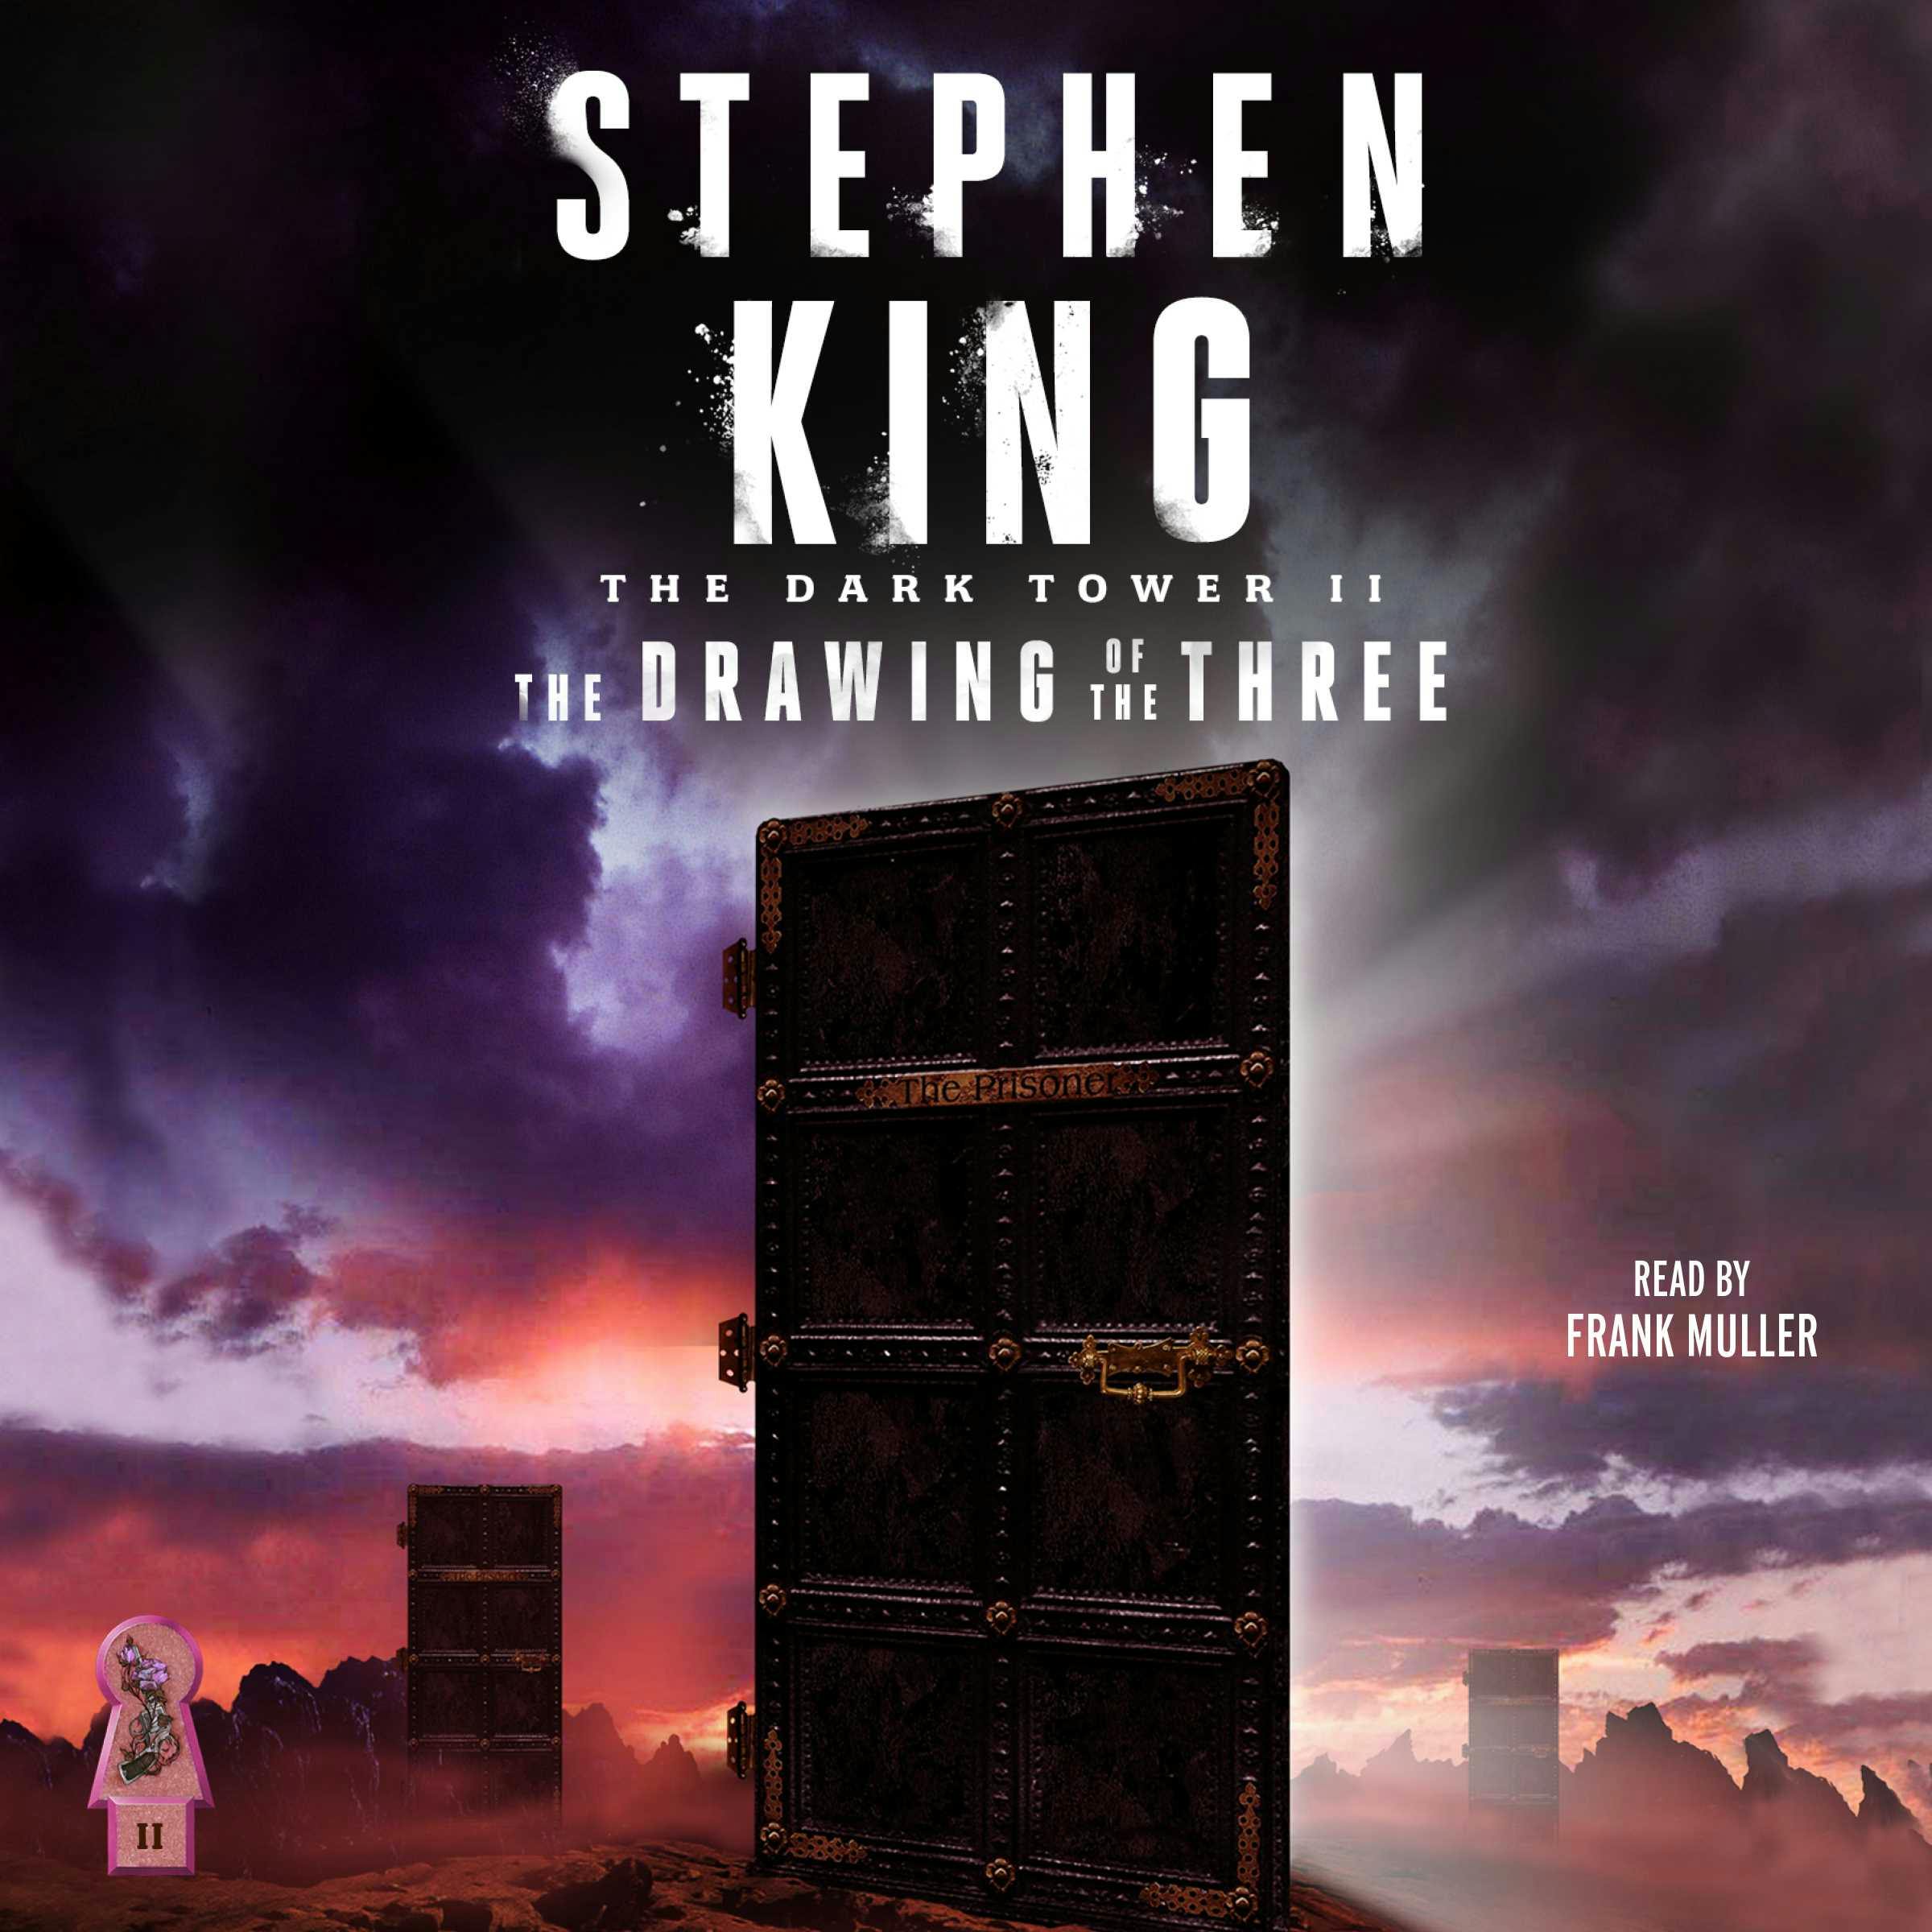 Dark Tower II: The Drawing of the Three - Stephen King